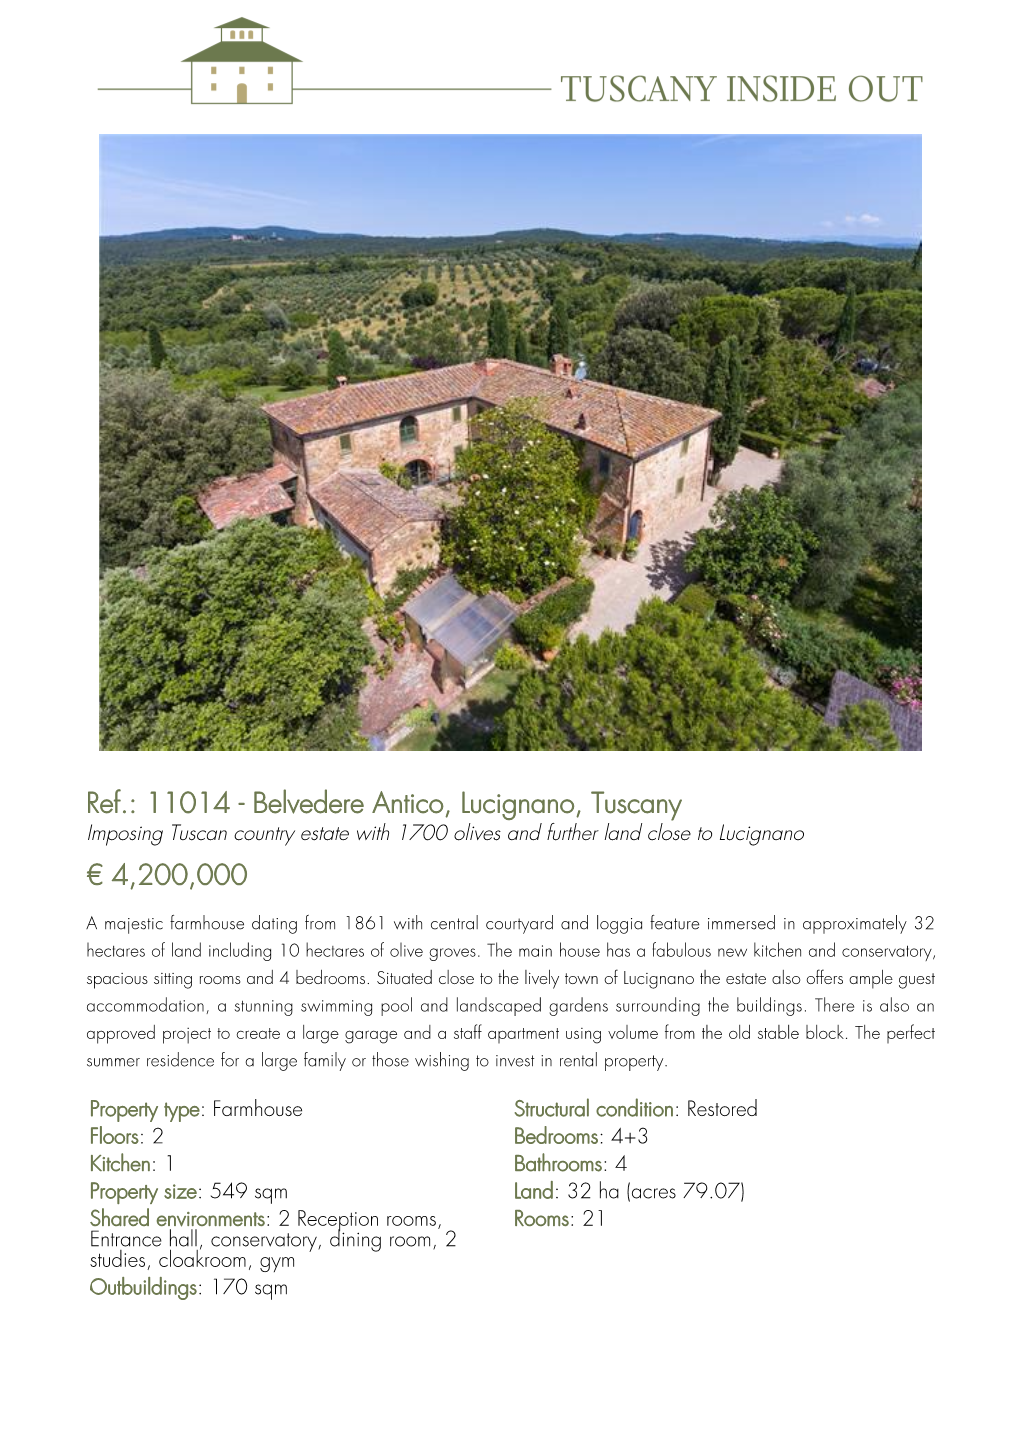 11014 - Belvedere Antico, Lucignano, Tuscany Imposing Tuscan Country Estate with 1700 Olives and Further Land Close to Lucignano